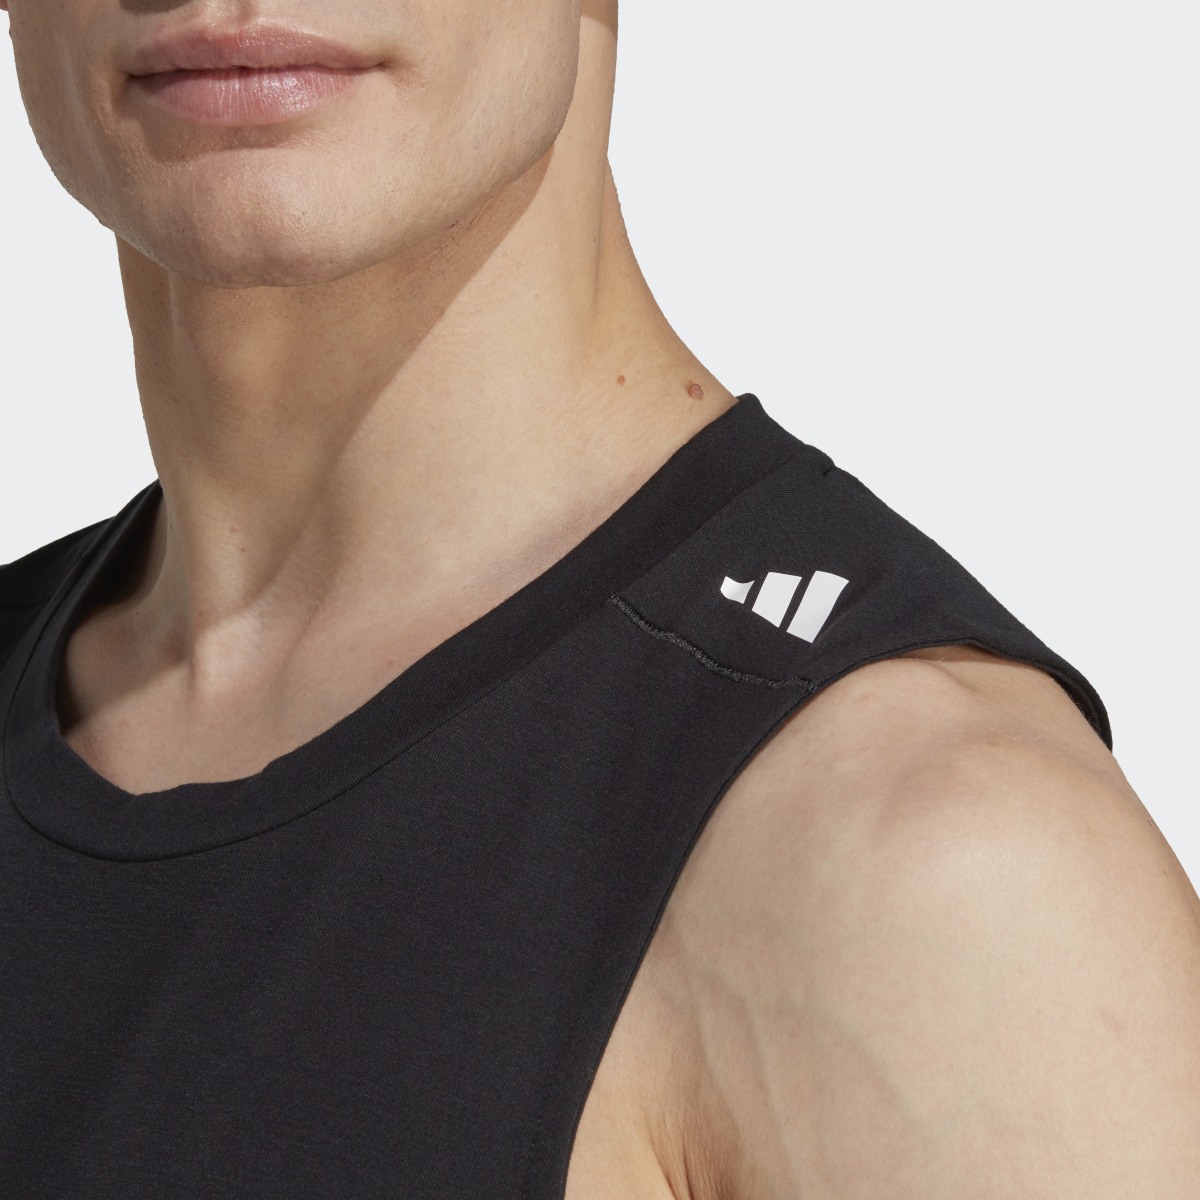 Adidas Designed for Training Workout Tank Top. 6